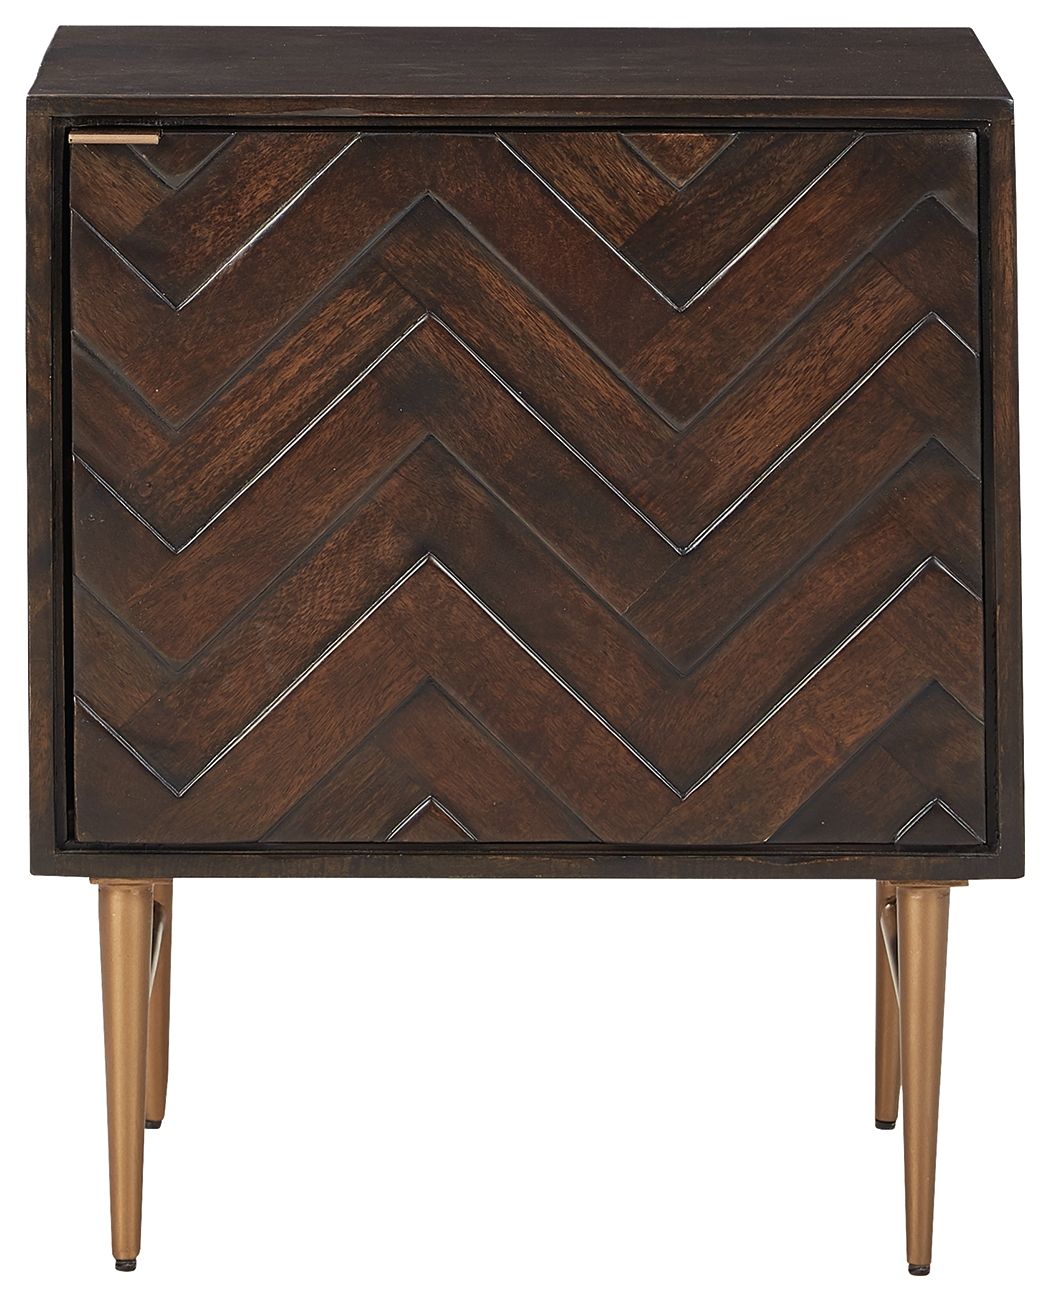 Dorvale - Accent Cabinet - Tony's Home Furnishings